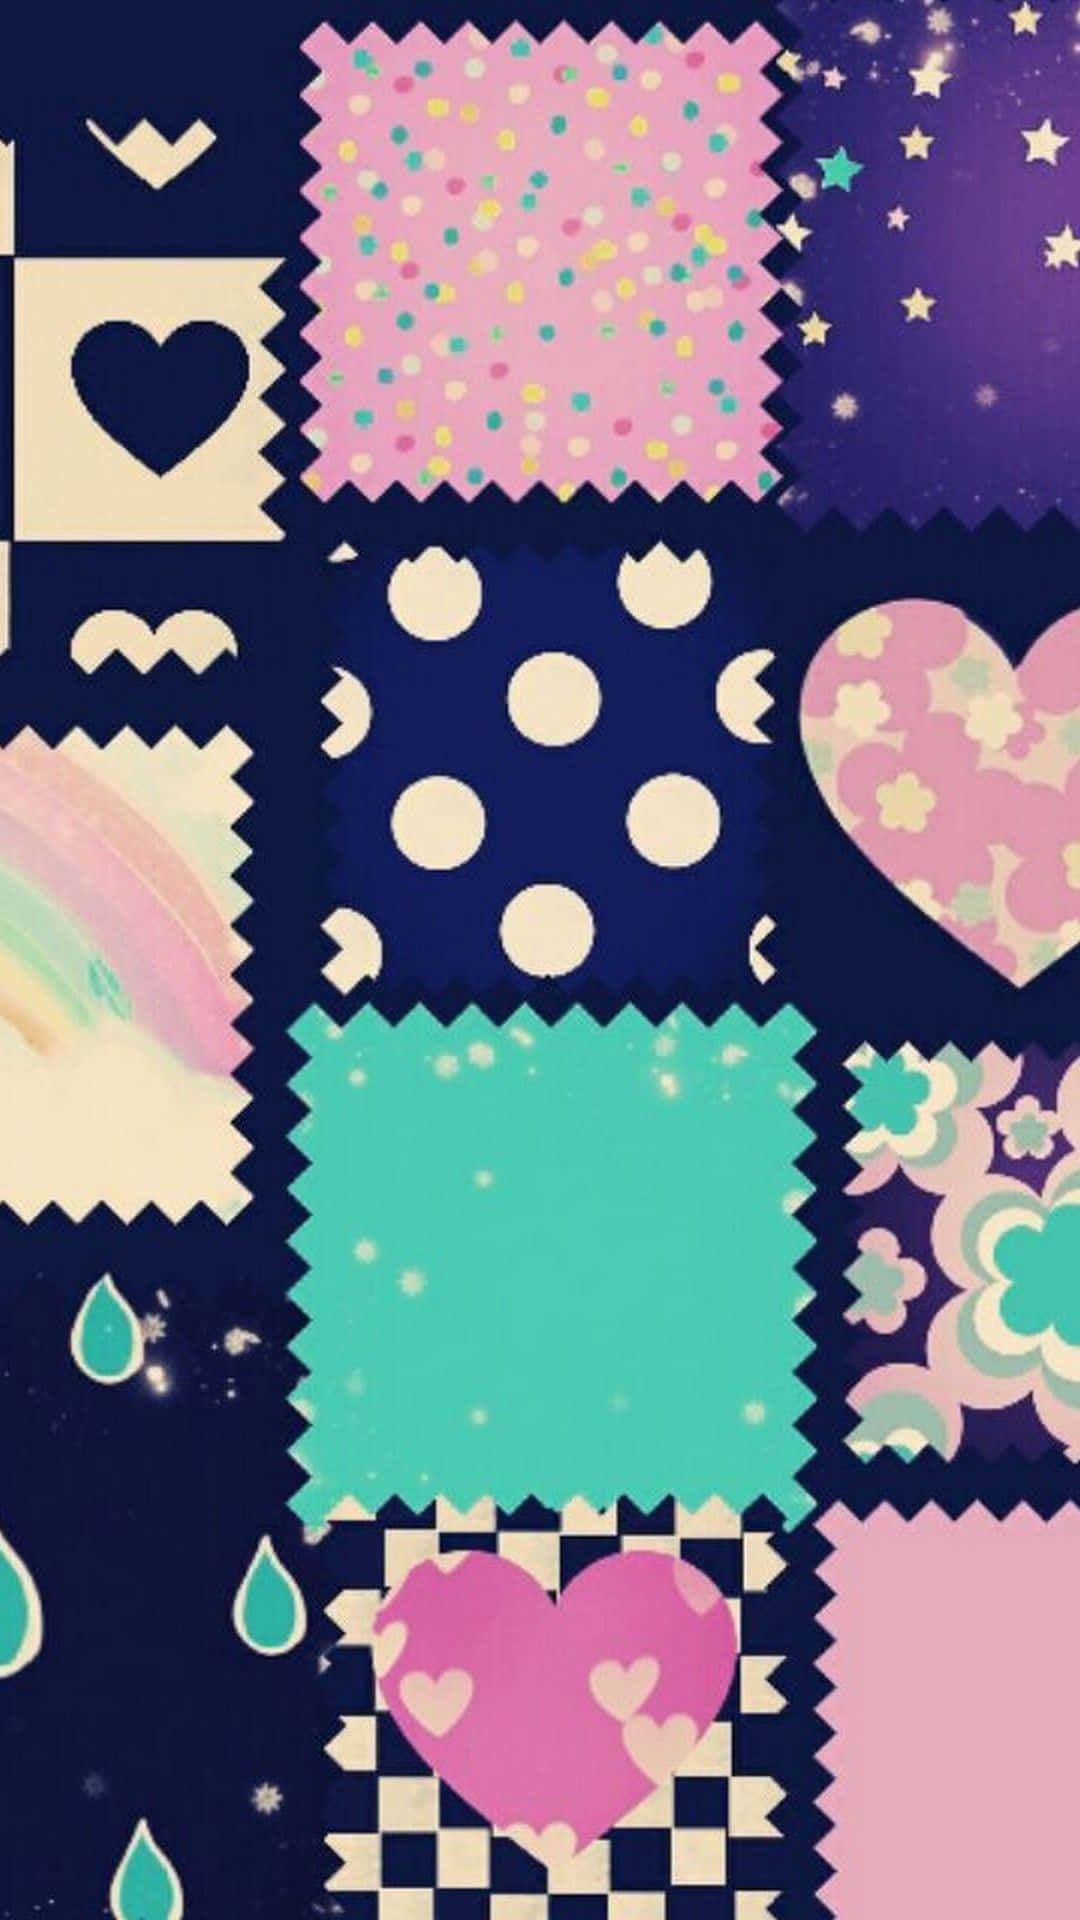 A cute and girly background to brighten up your day.